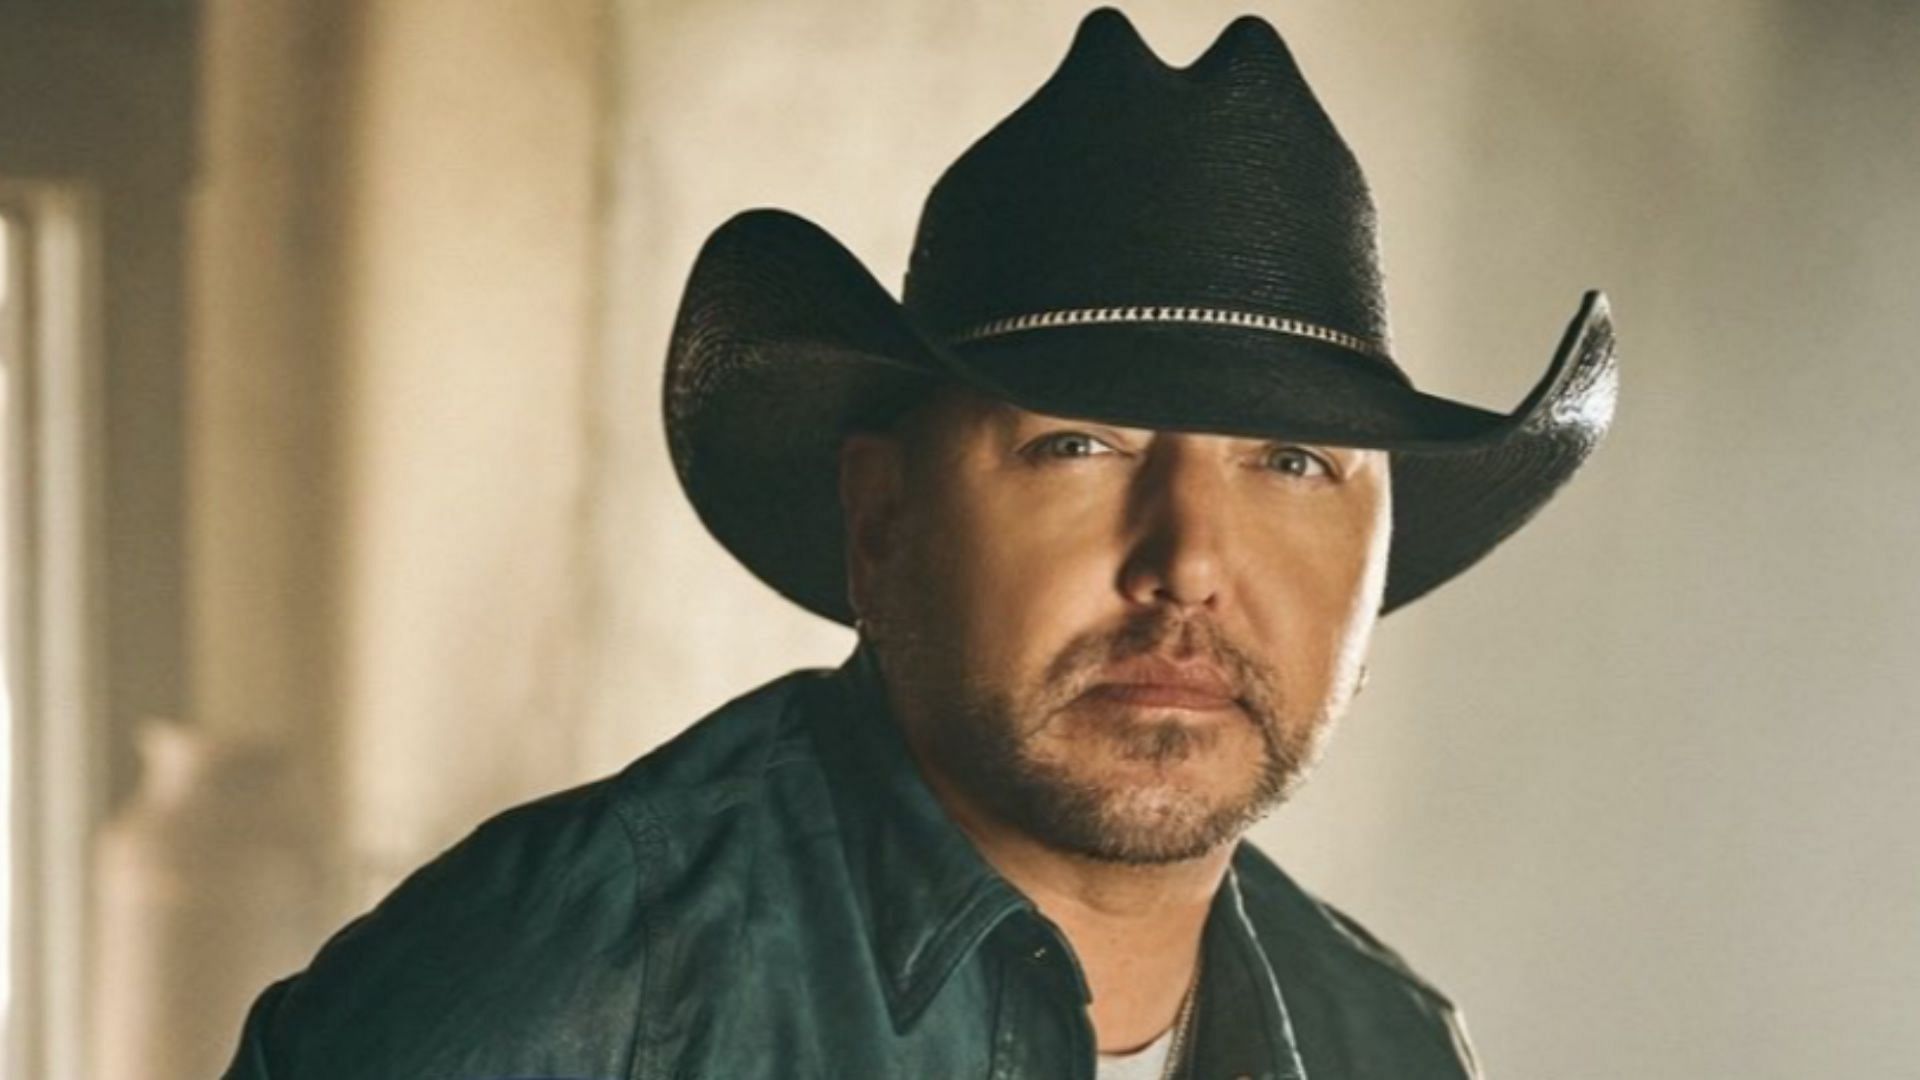 CMT took down the music video of Jason Aldean